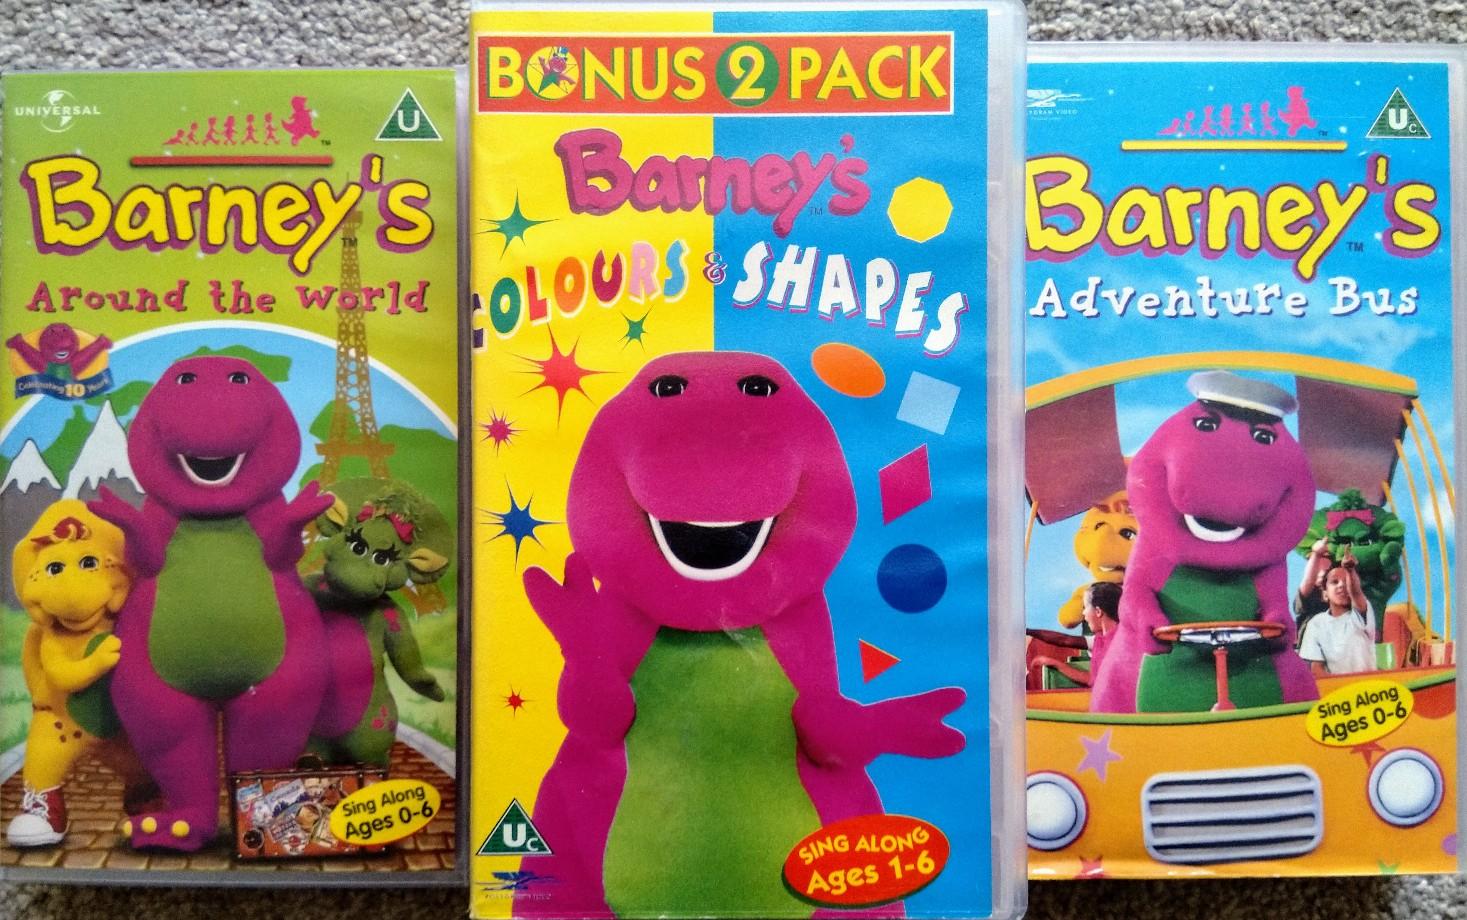 Vhs Rock With Barney Front Barney Rock Dvd Covers The Best Porn Website